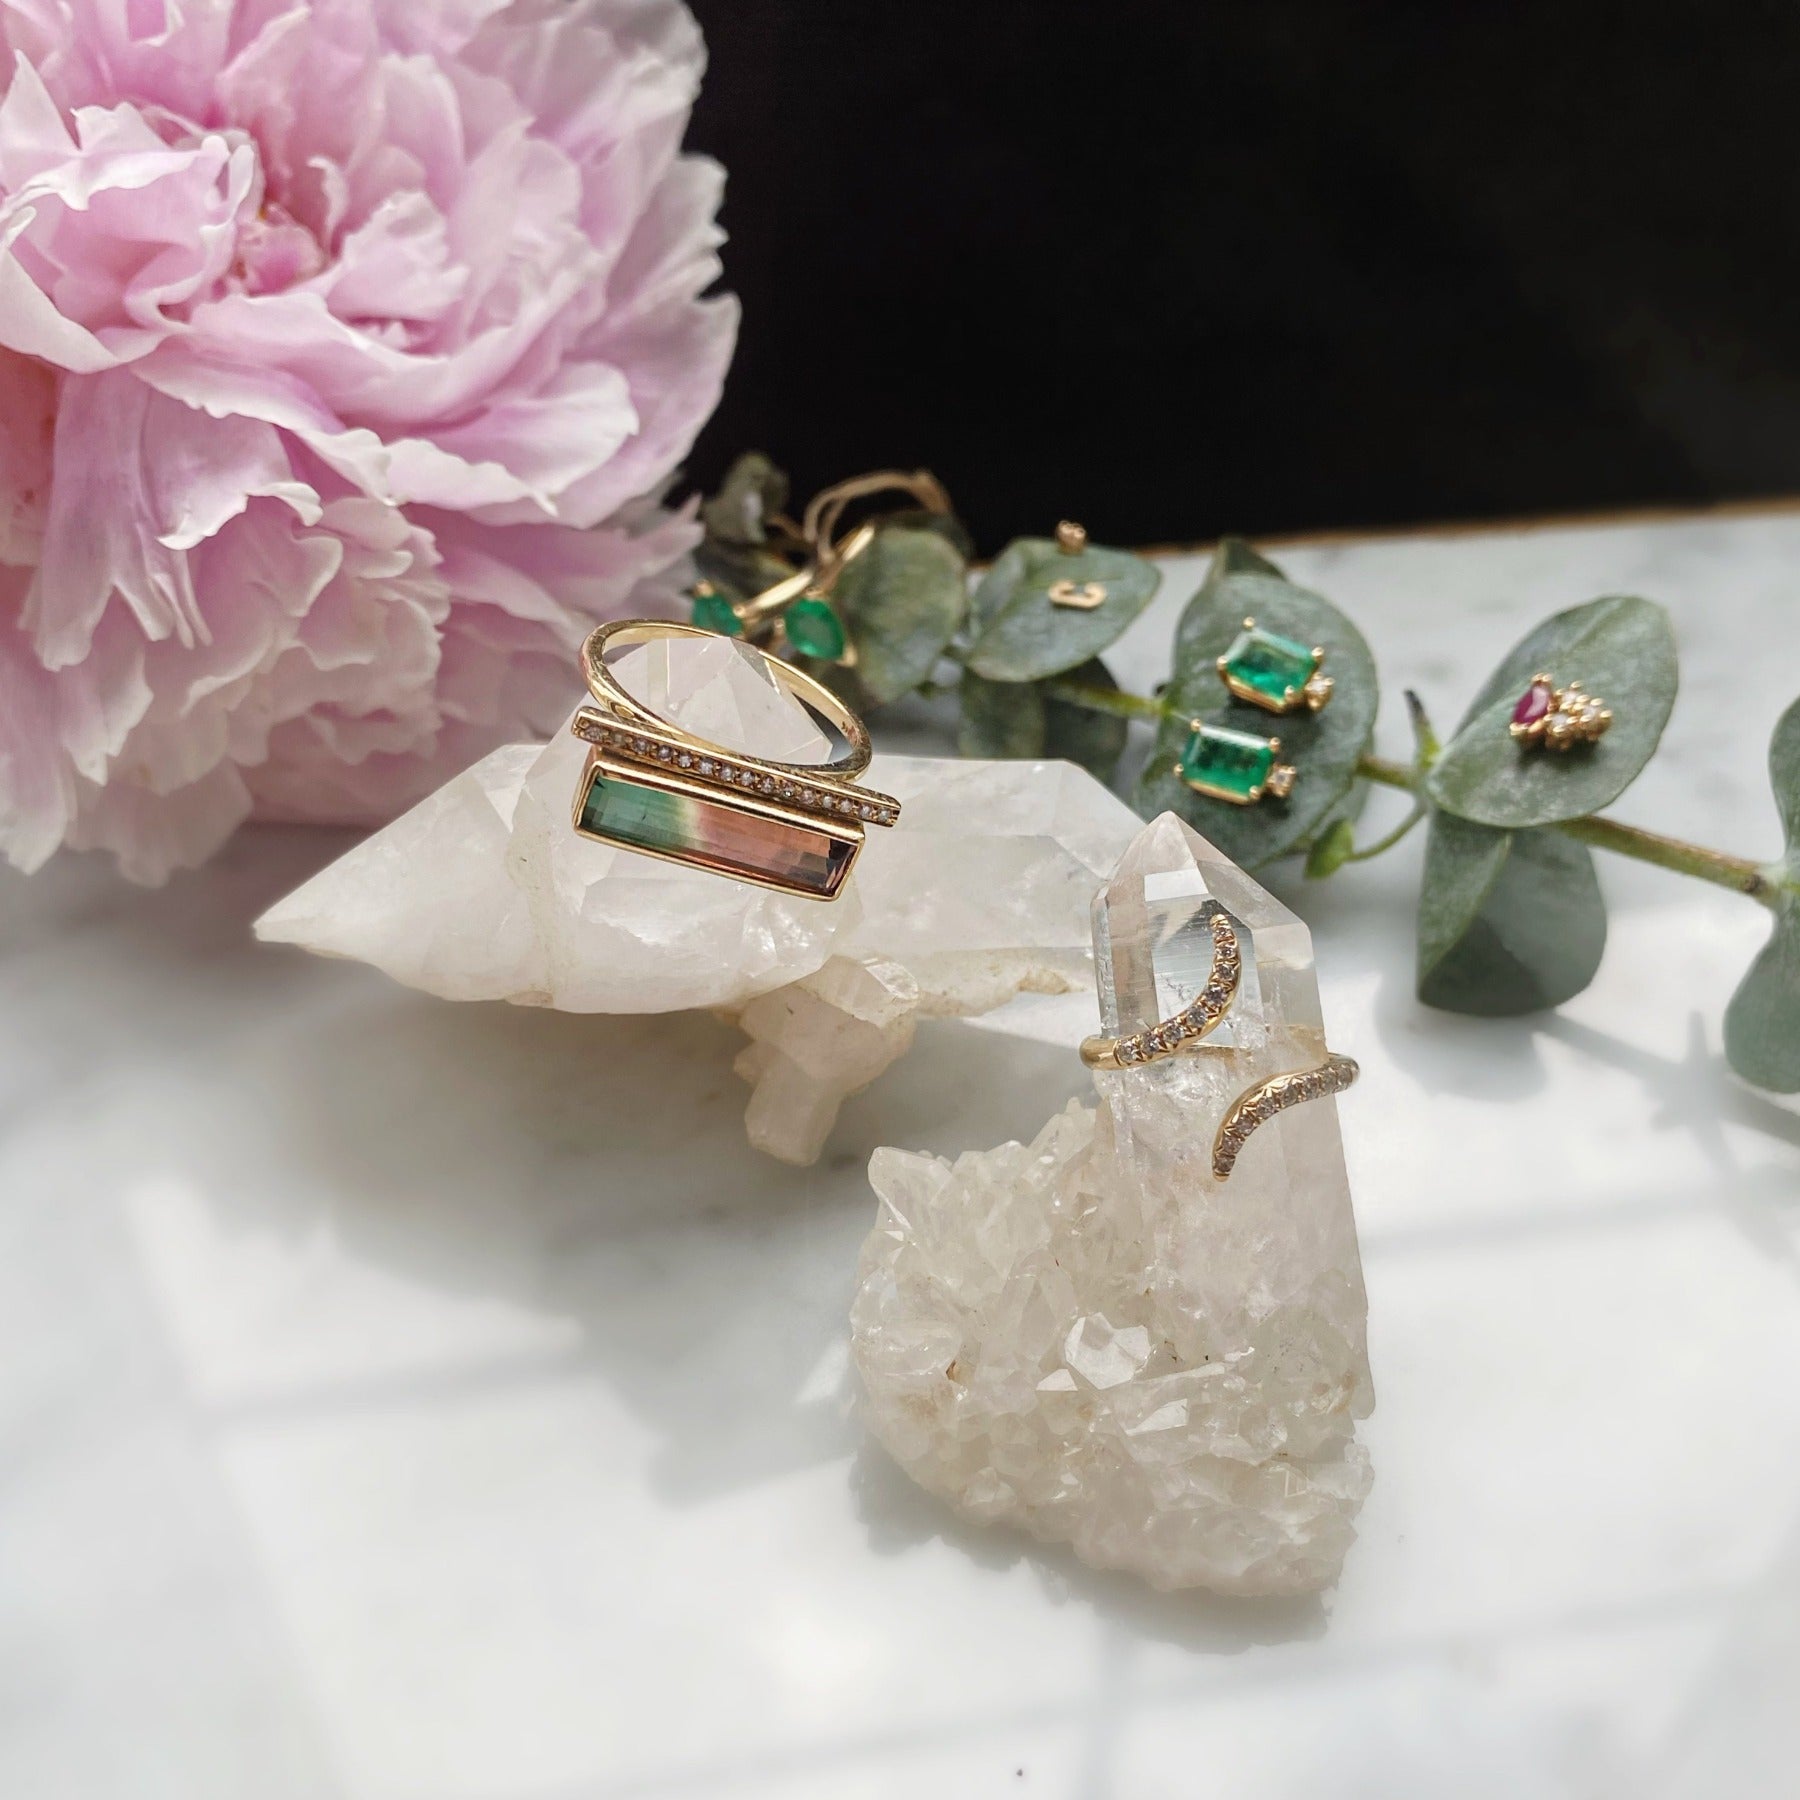 Tourmaline Gemstone & Diamond Ring with other gemstone earrings on display - Camille Jewelry